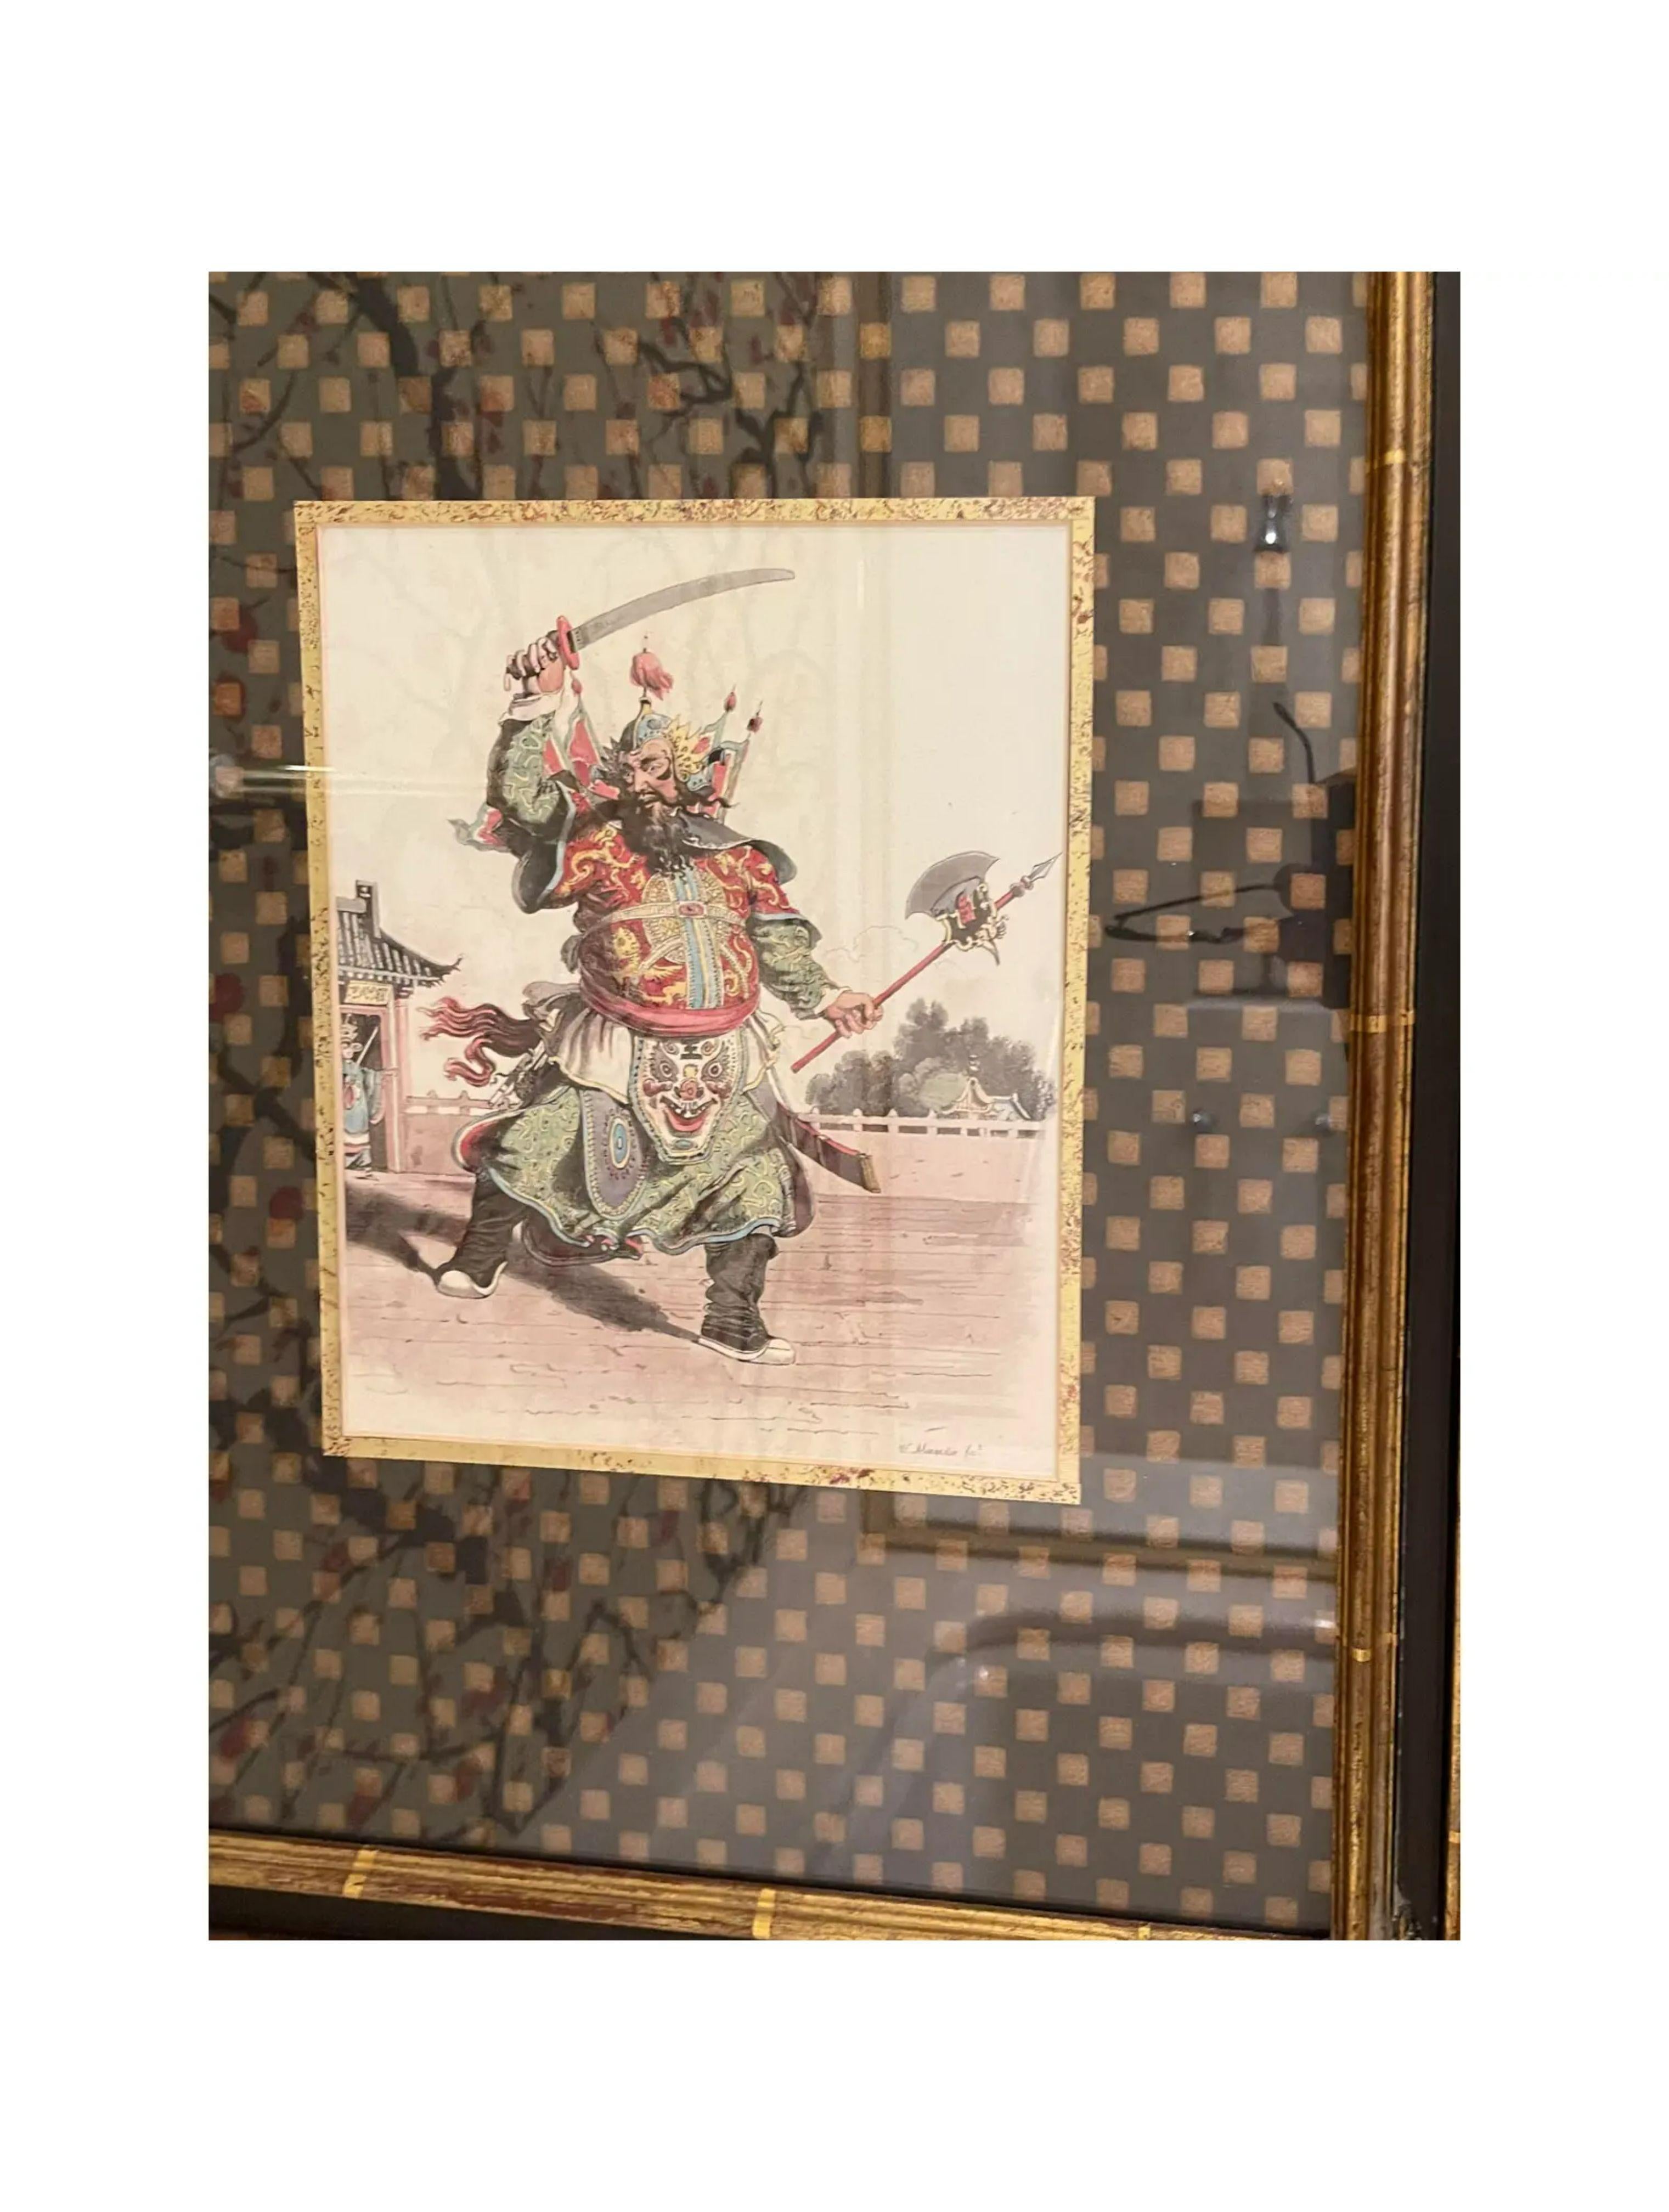 Antique hand colored Chinese Costume Prints by William Alexander

Additional information: 
Materials: Paper
Color: Pink
Period: early 19th century
Art Subjects: Fashion
Styles: Chinese
Frame Type: Framed
Item Type: Vintage, Antique or